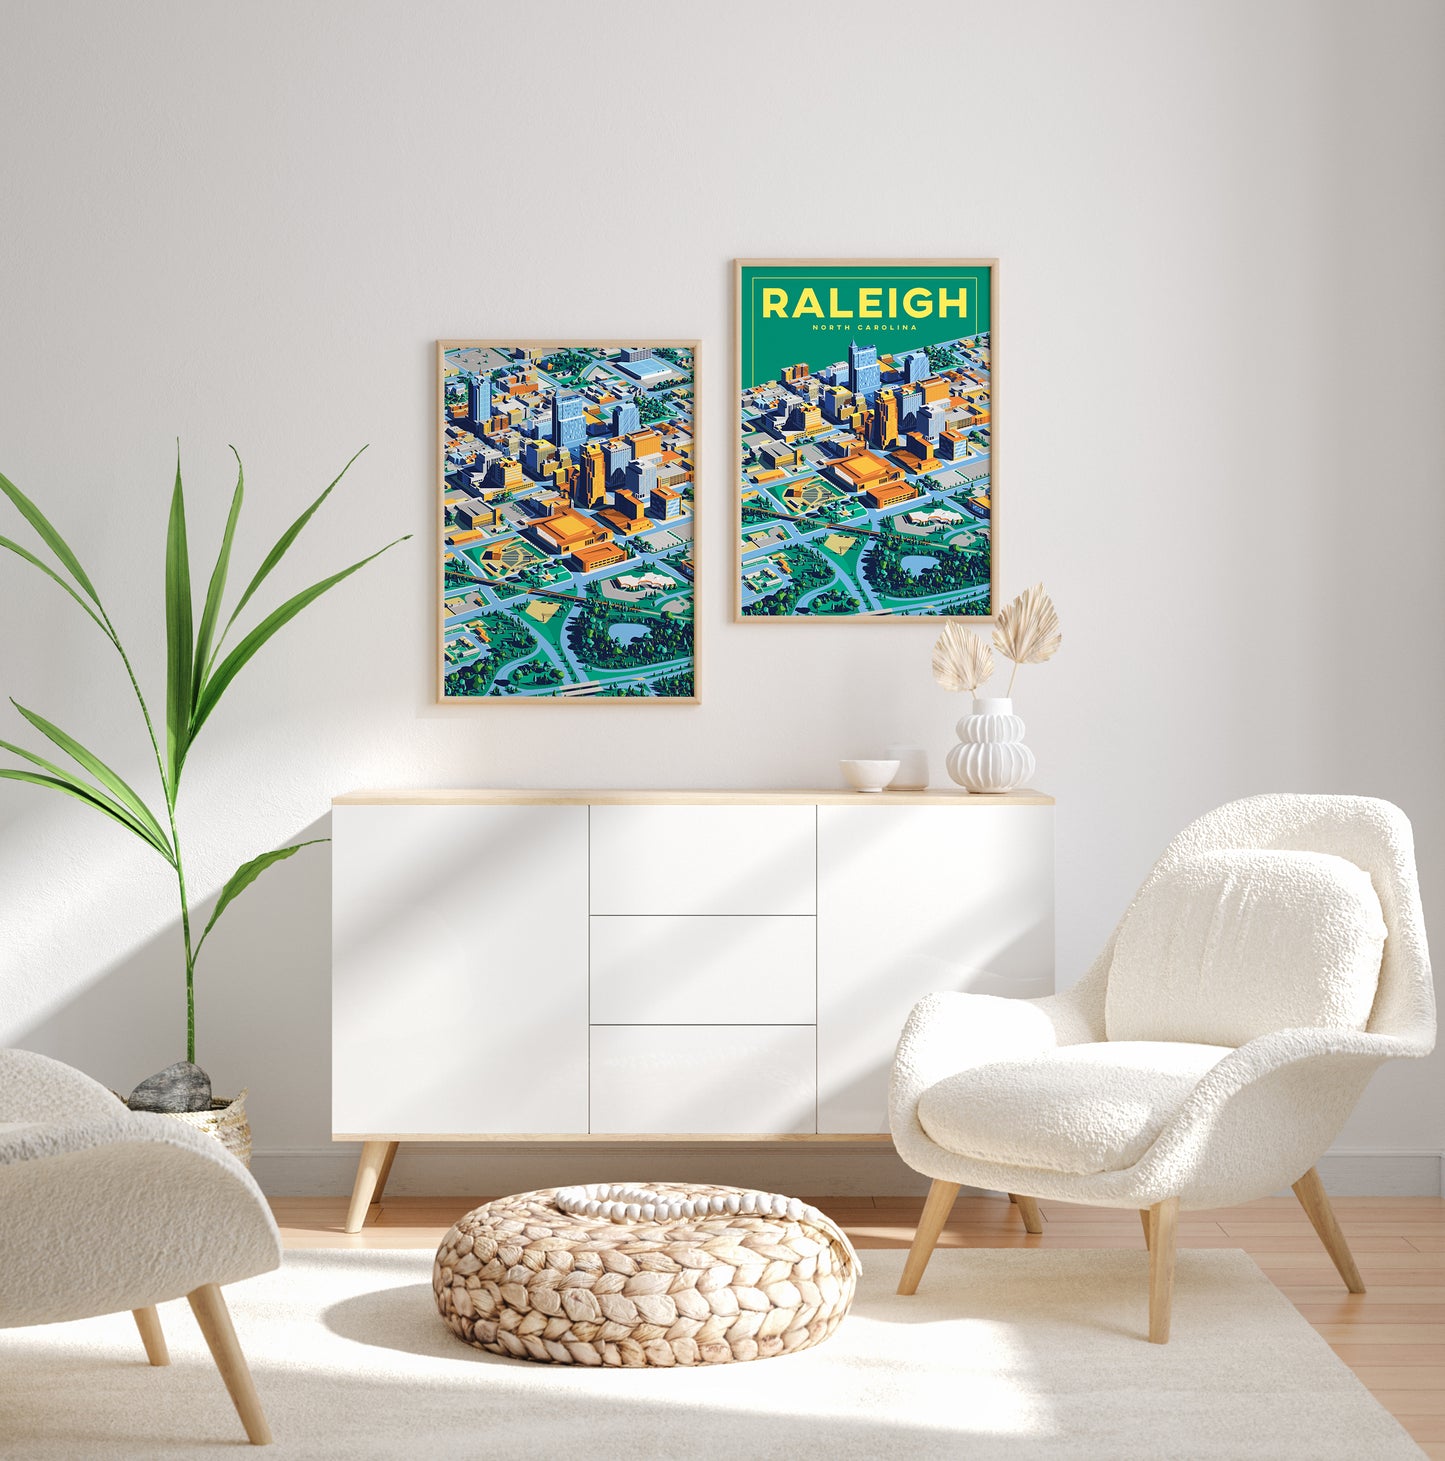 The Raleigh Poster  |  Full Canvas Version  |  12in x 18in